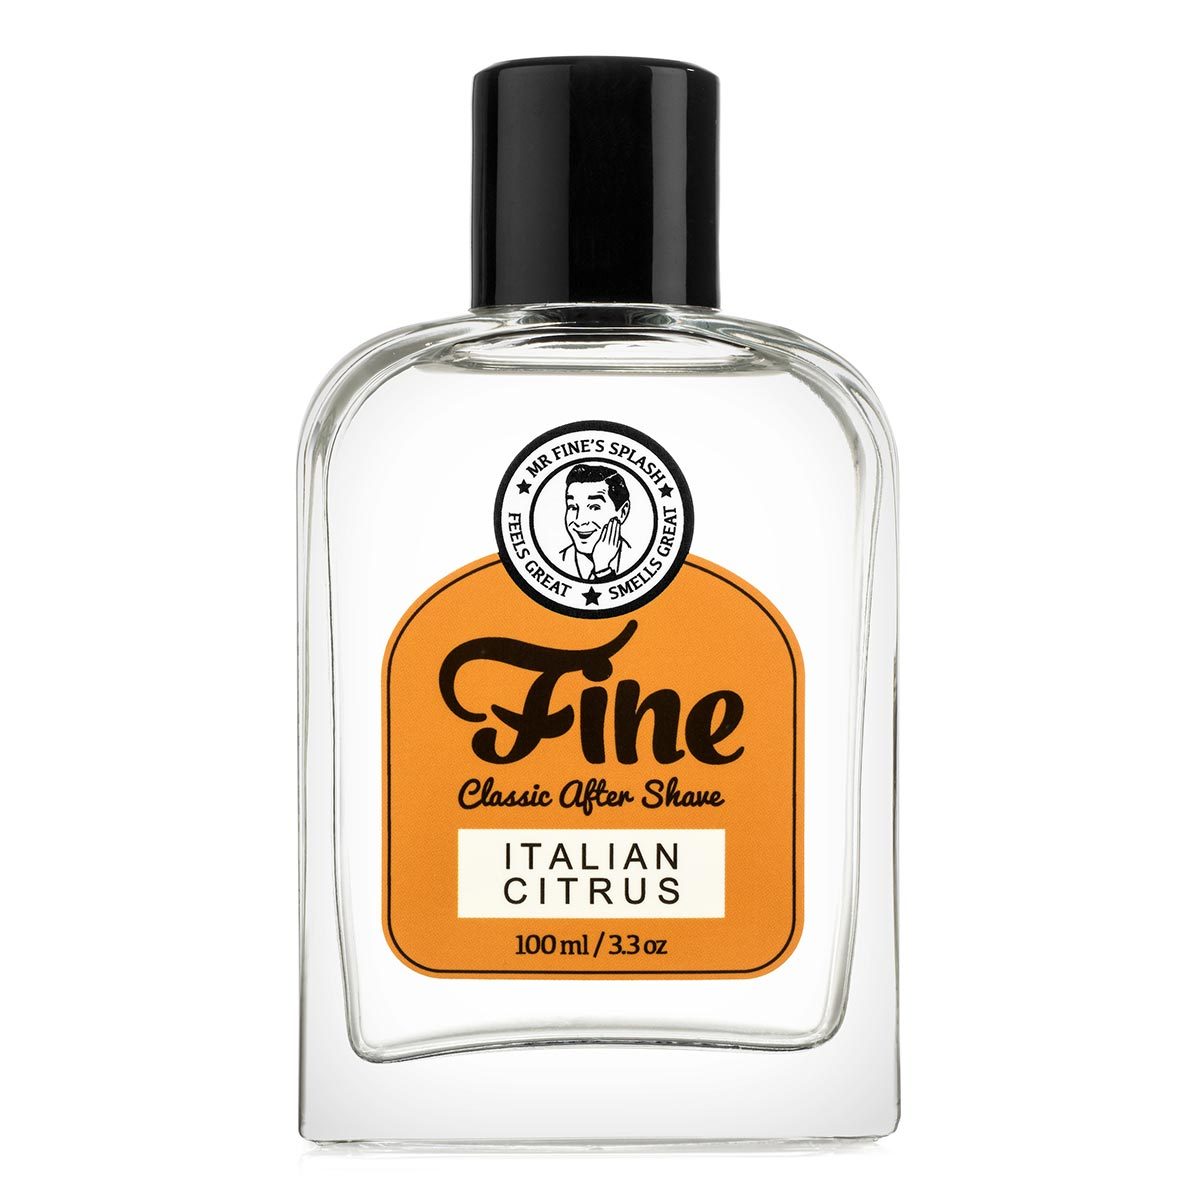 Primary image of Italian Citrus After Shave Splash